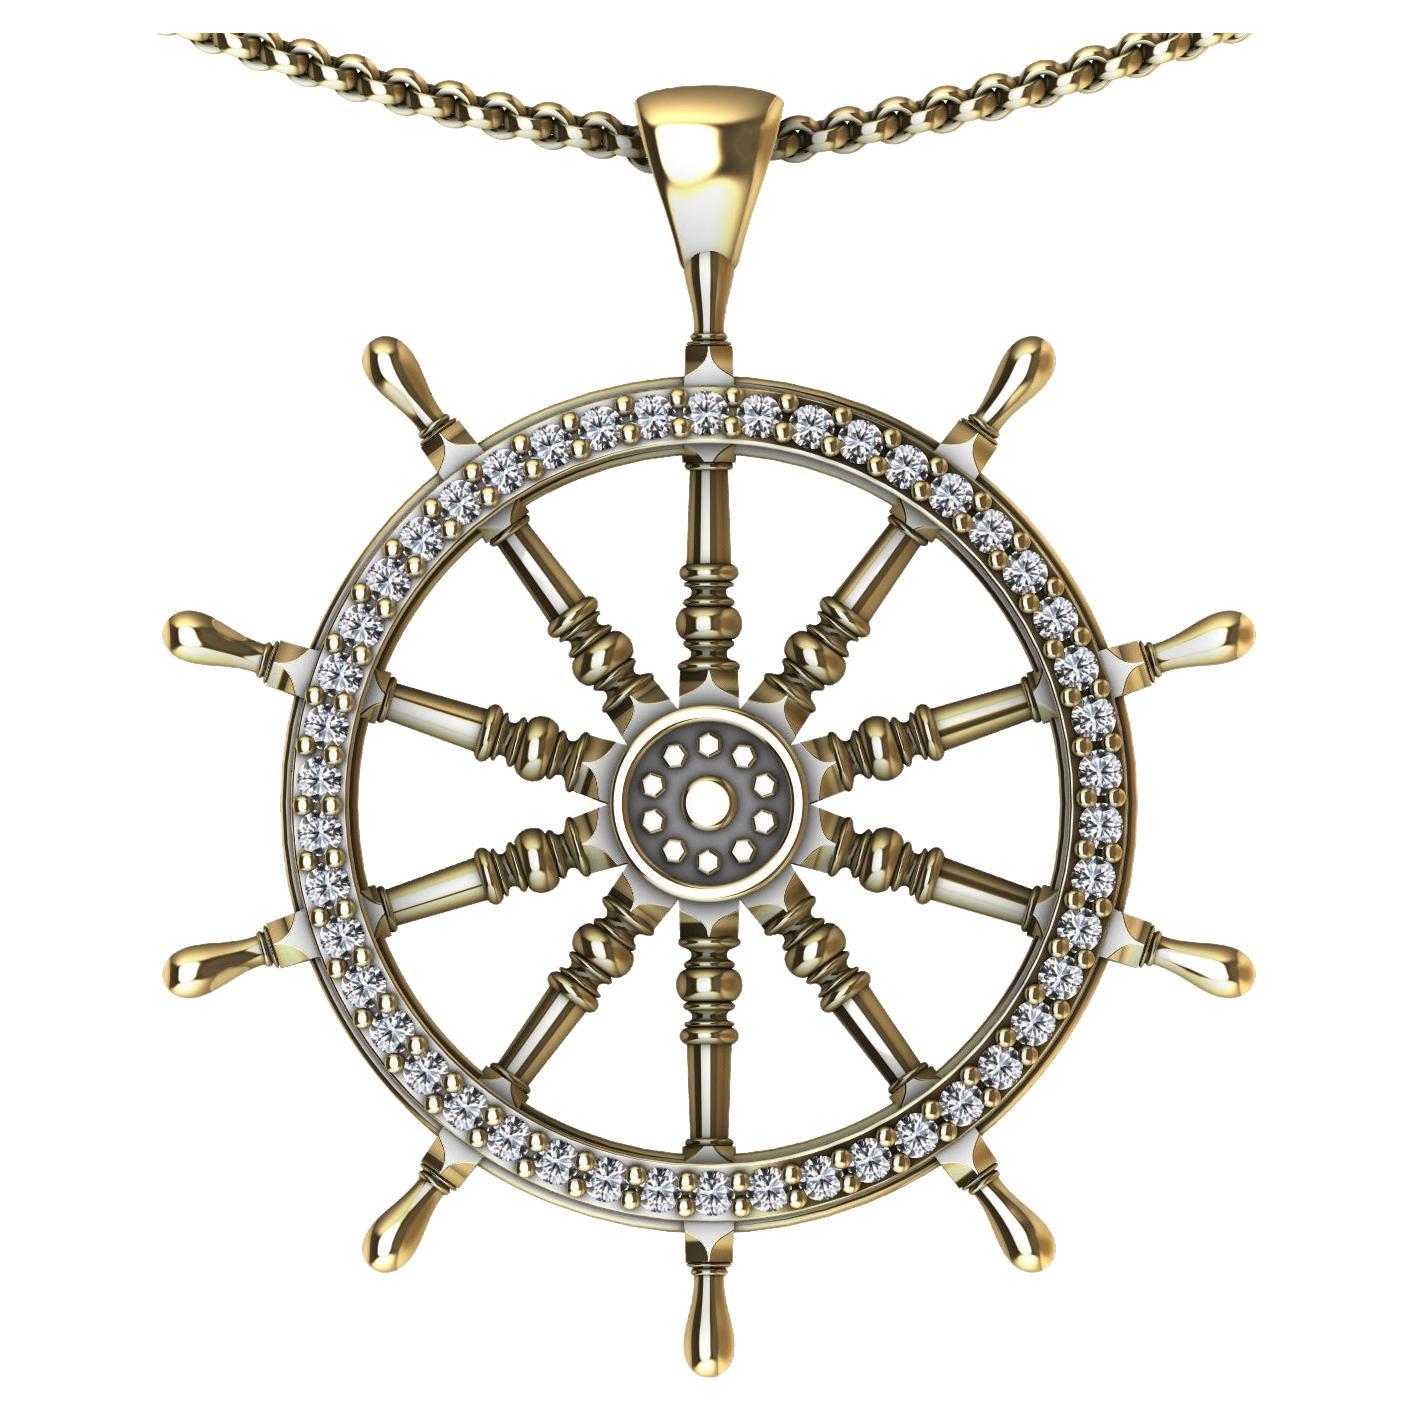 18 Karat Captain Sailors Diamond Wheel Pendant, For you water and wind lovers. Tiffany Designer , Thomas Kurilla has not forgotten you mates. Inspired from antique wooden ship wheels. A sailing lover as well. Let the winds blow through your hair and